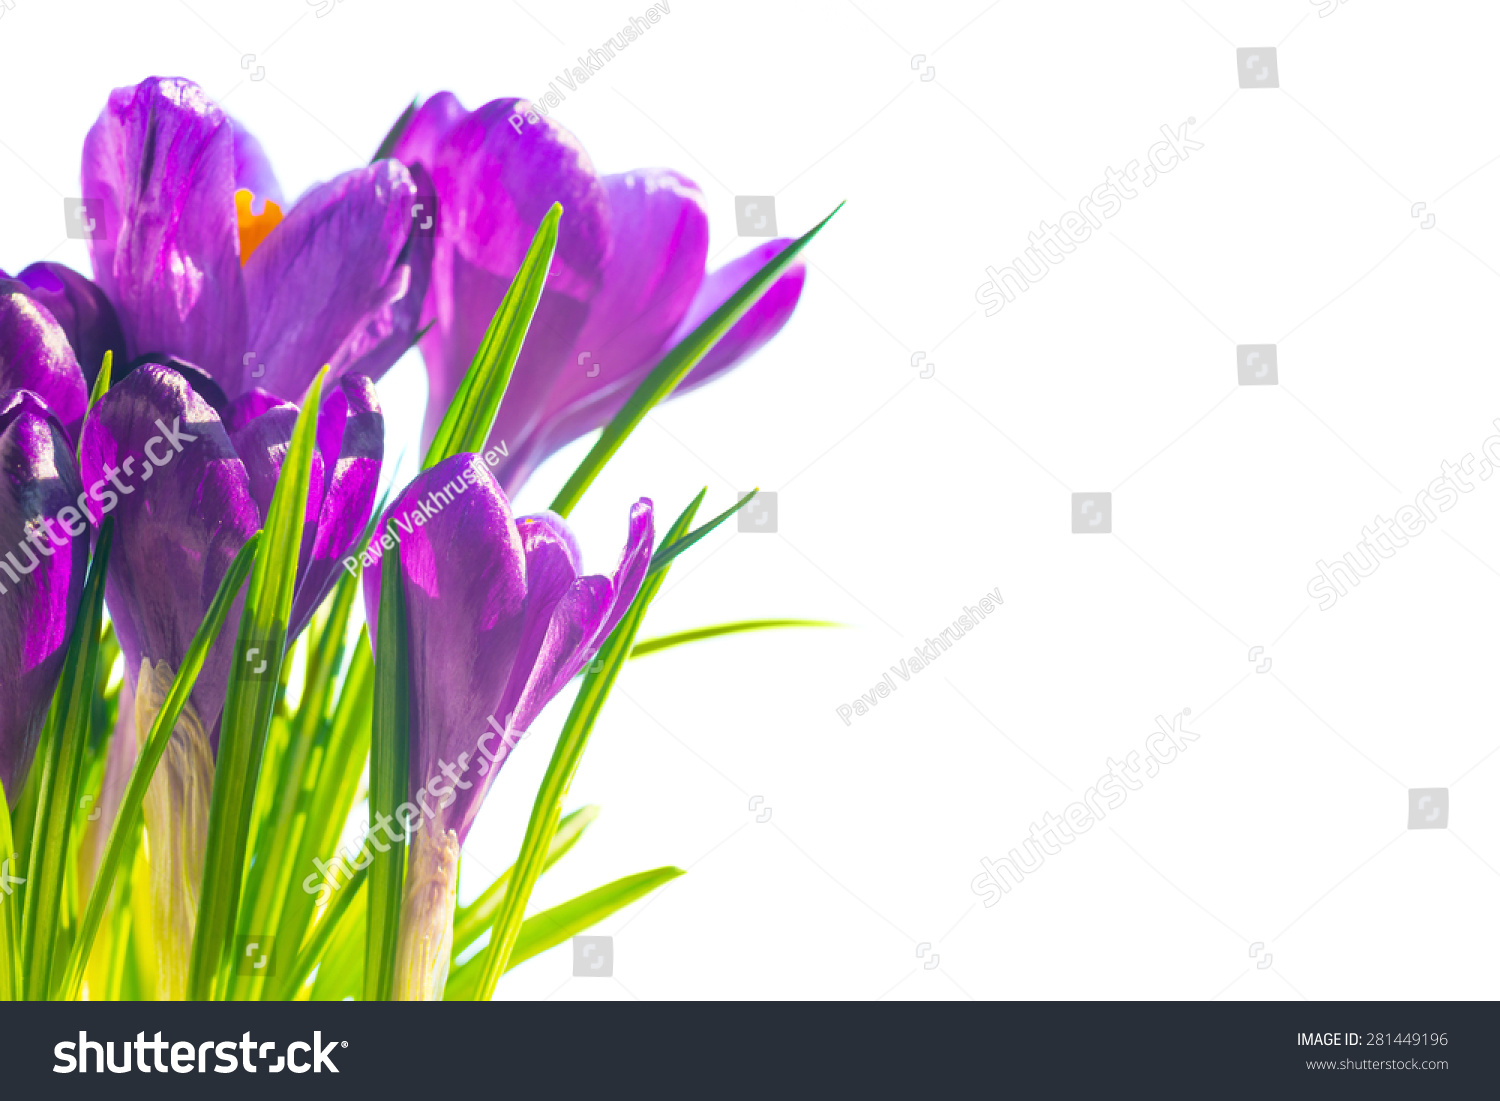 First spring flowers - bouquet of purple crocuses isolated on white background with copyspace #281449196